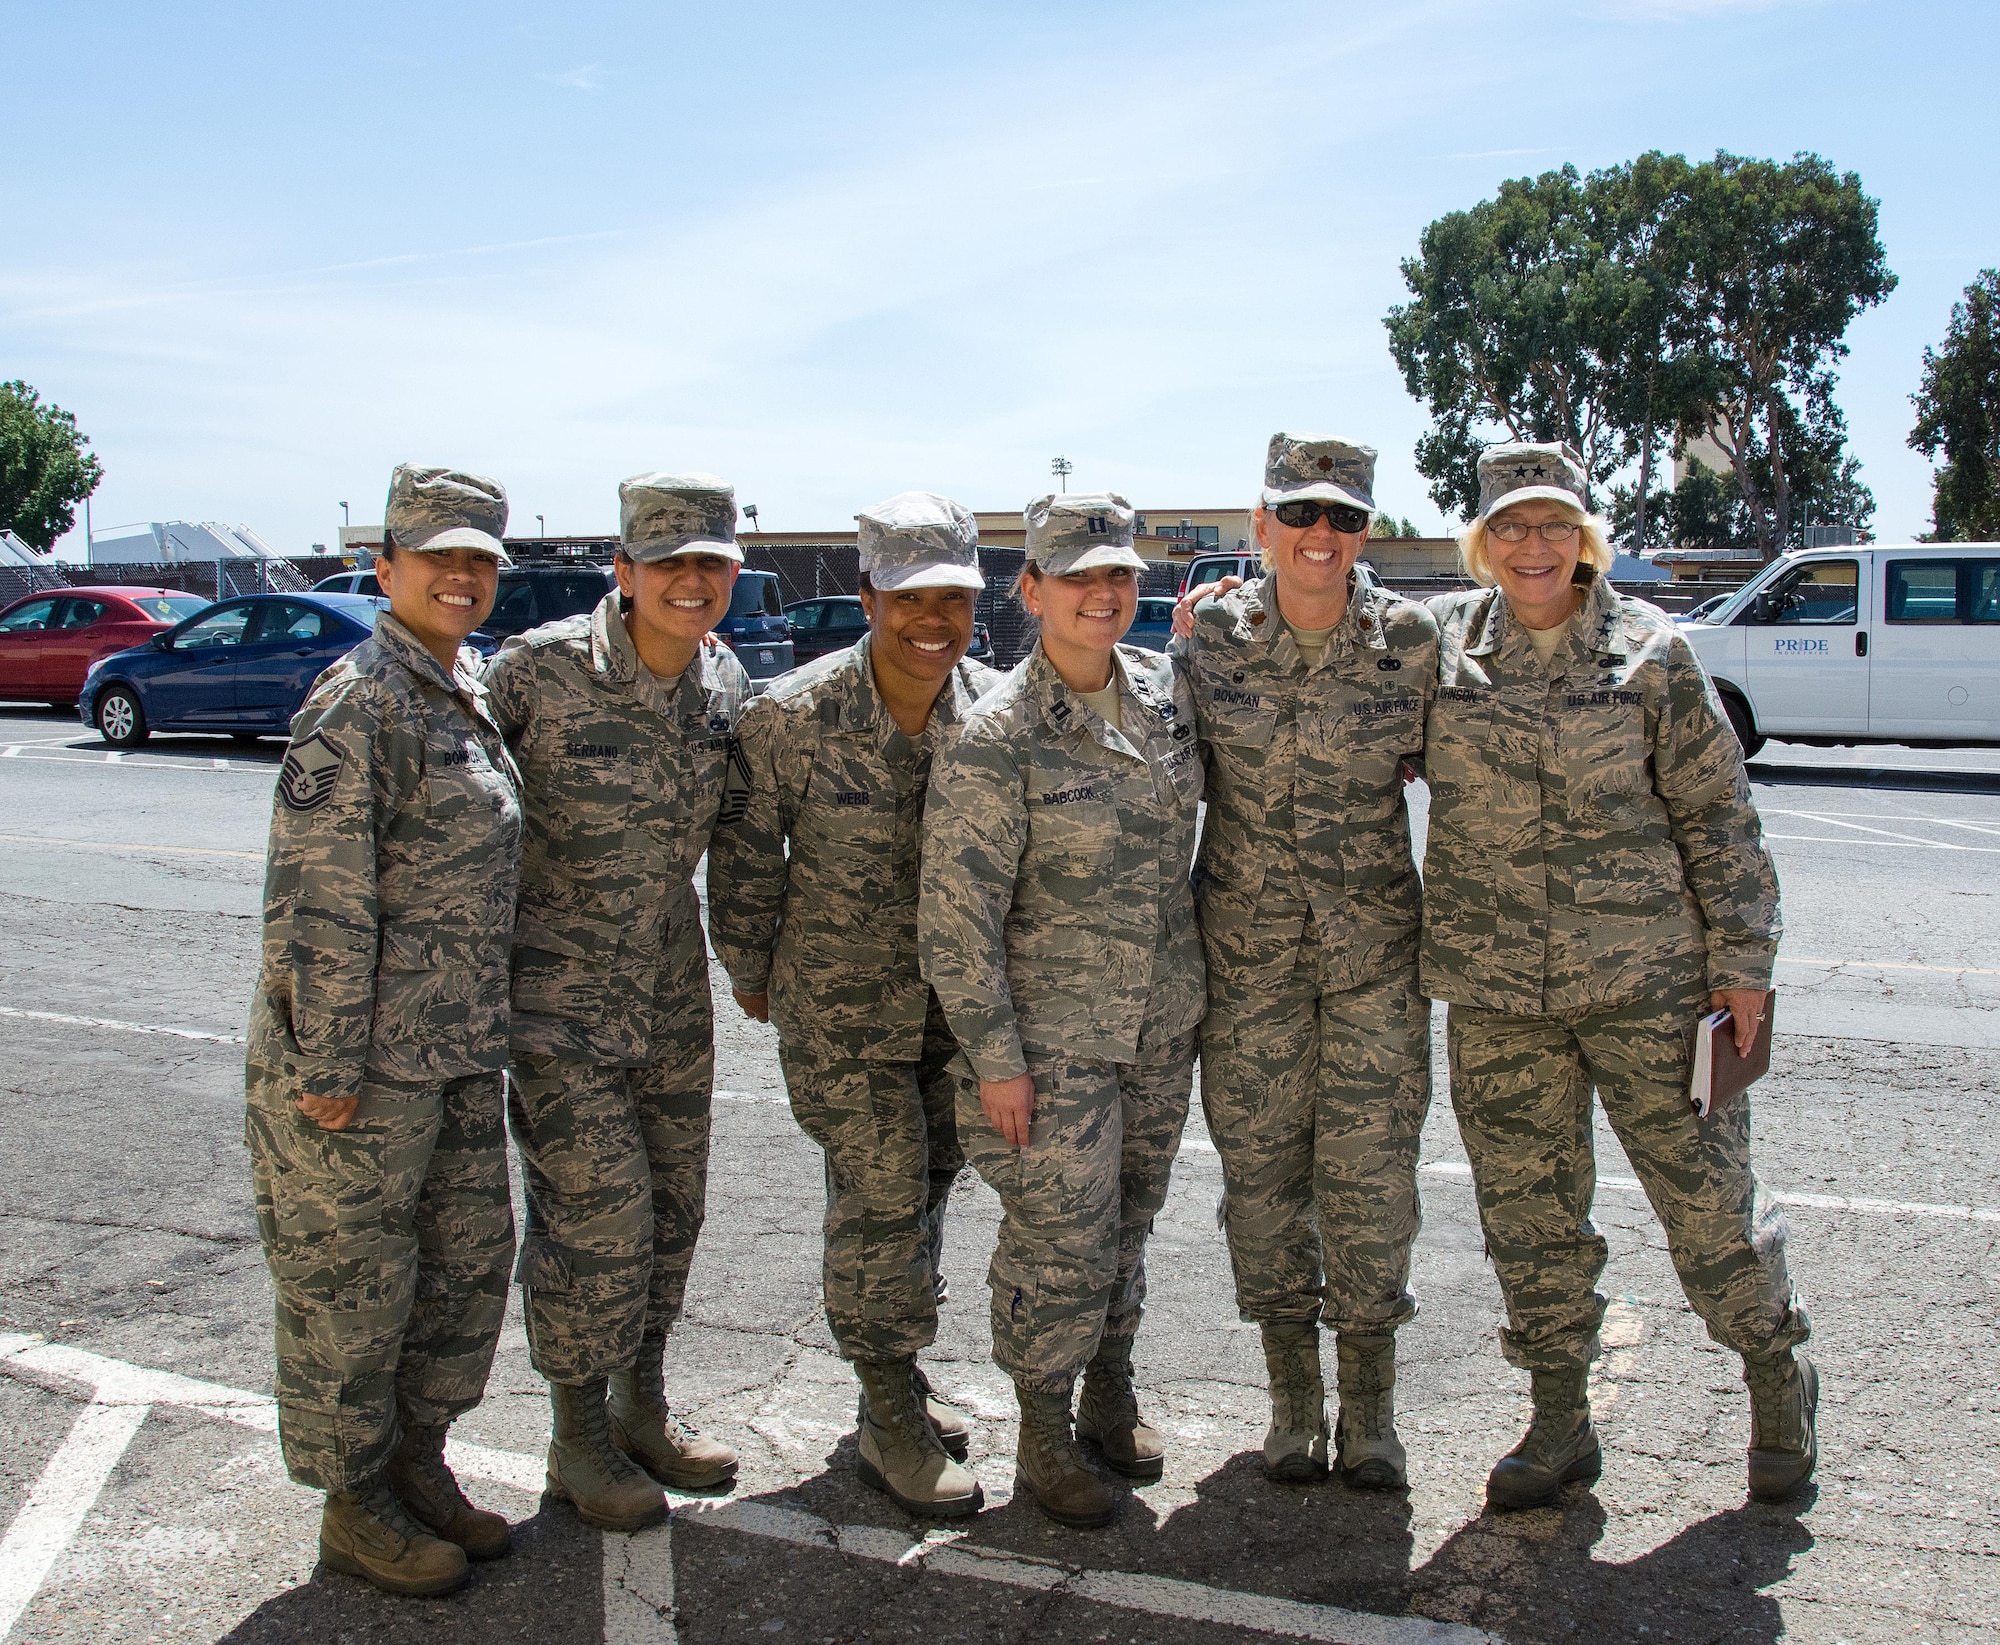 Members of the 349th Logistics Readiness Squadron pose for a photo with Maj. Gen. Kathryn Johnson, Air Force Reserve Command director of logistics, at Travis Air Force Base, Calif., on Aug. 14, 2017.